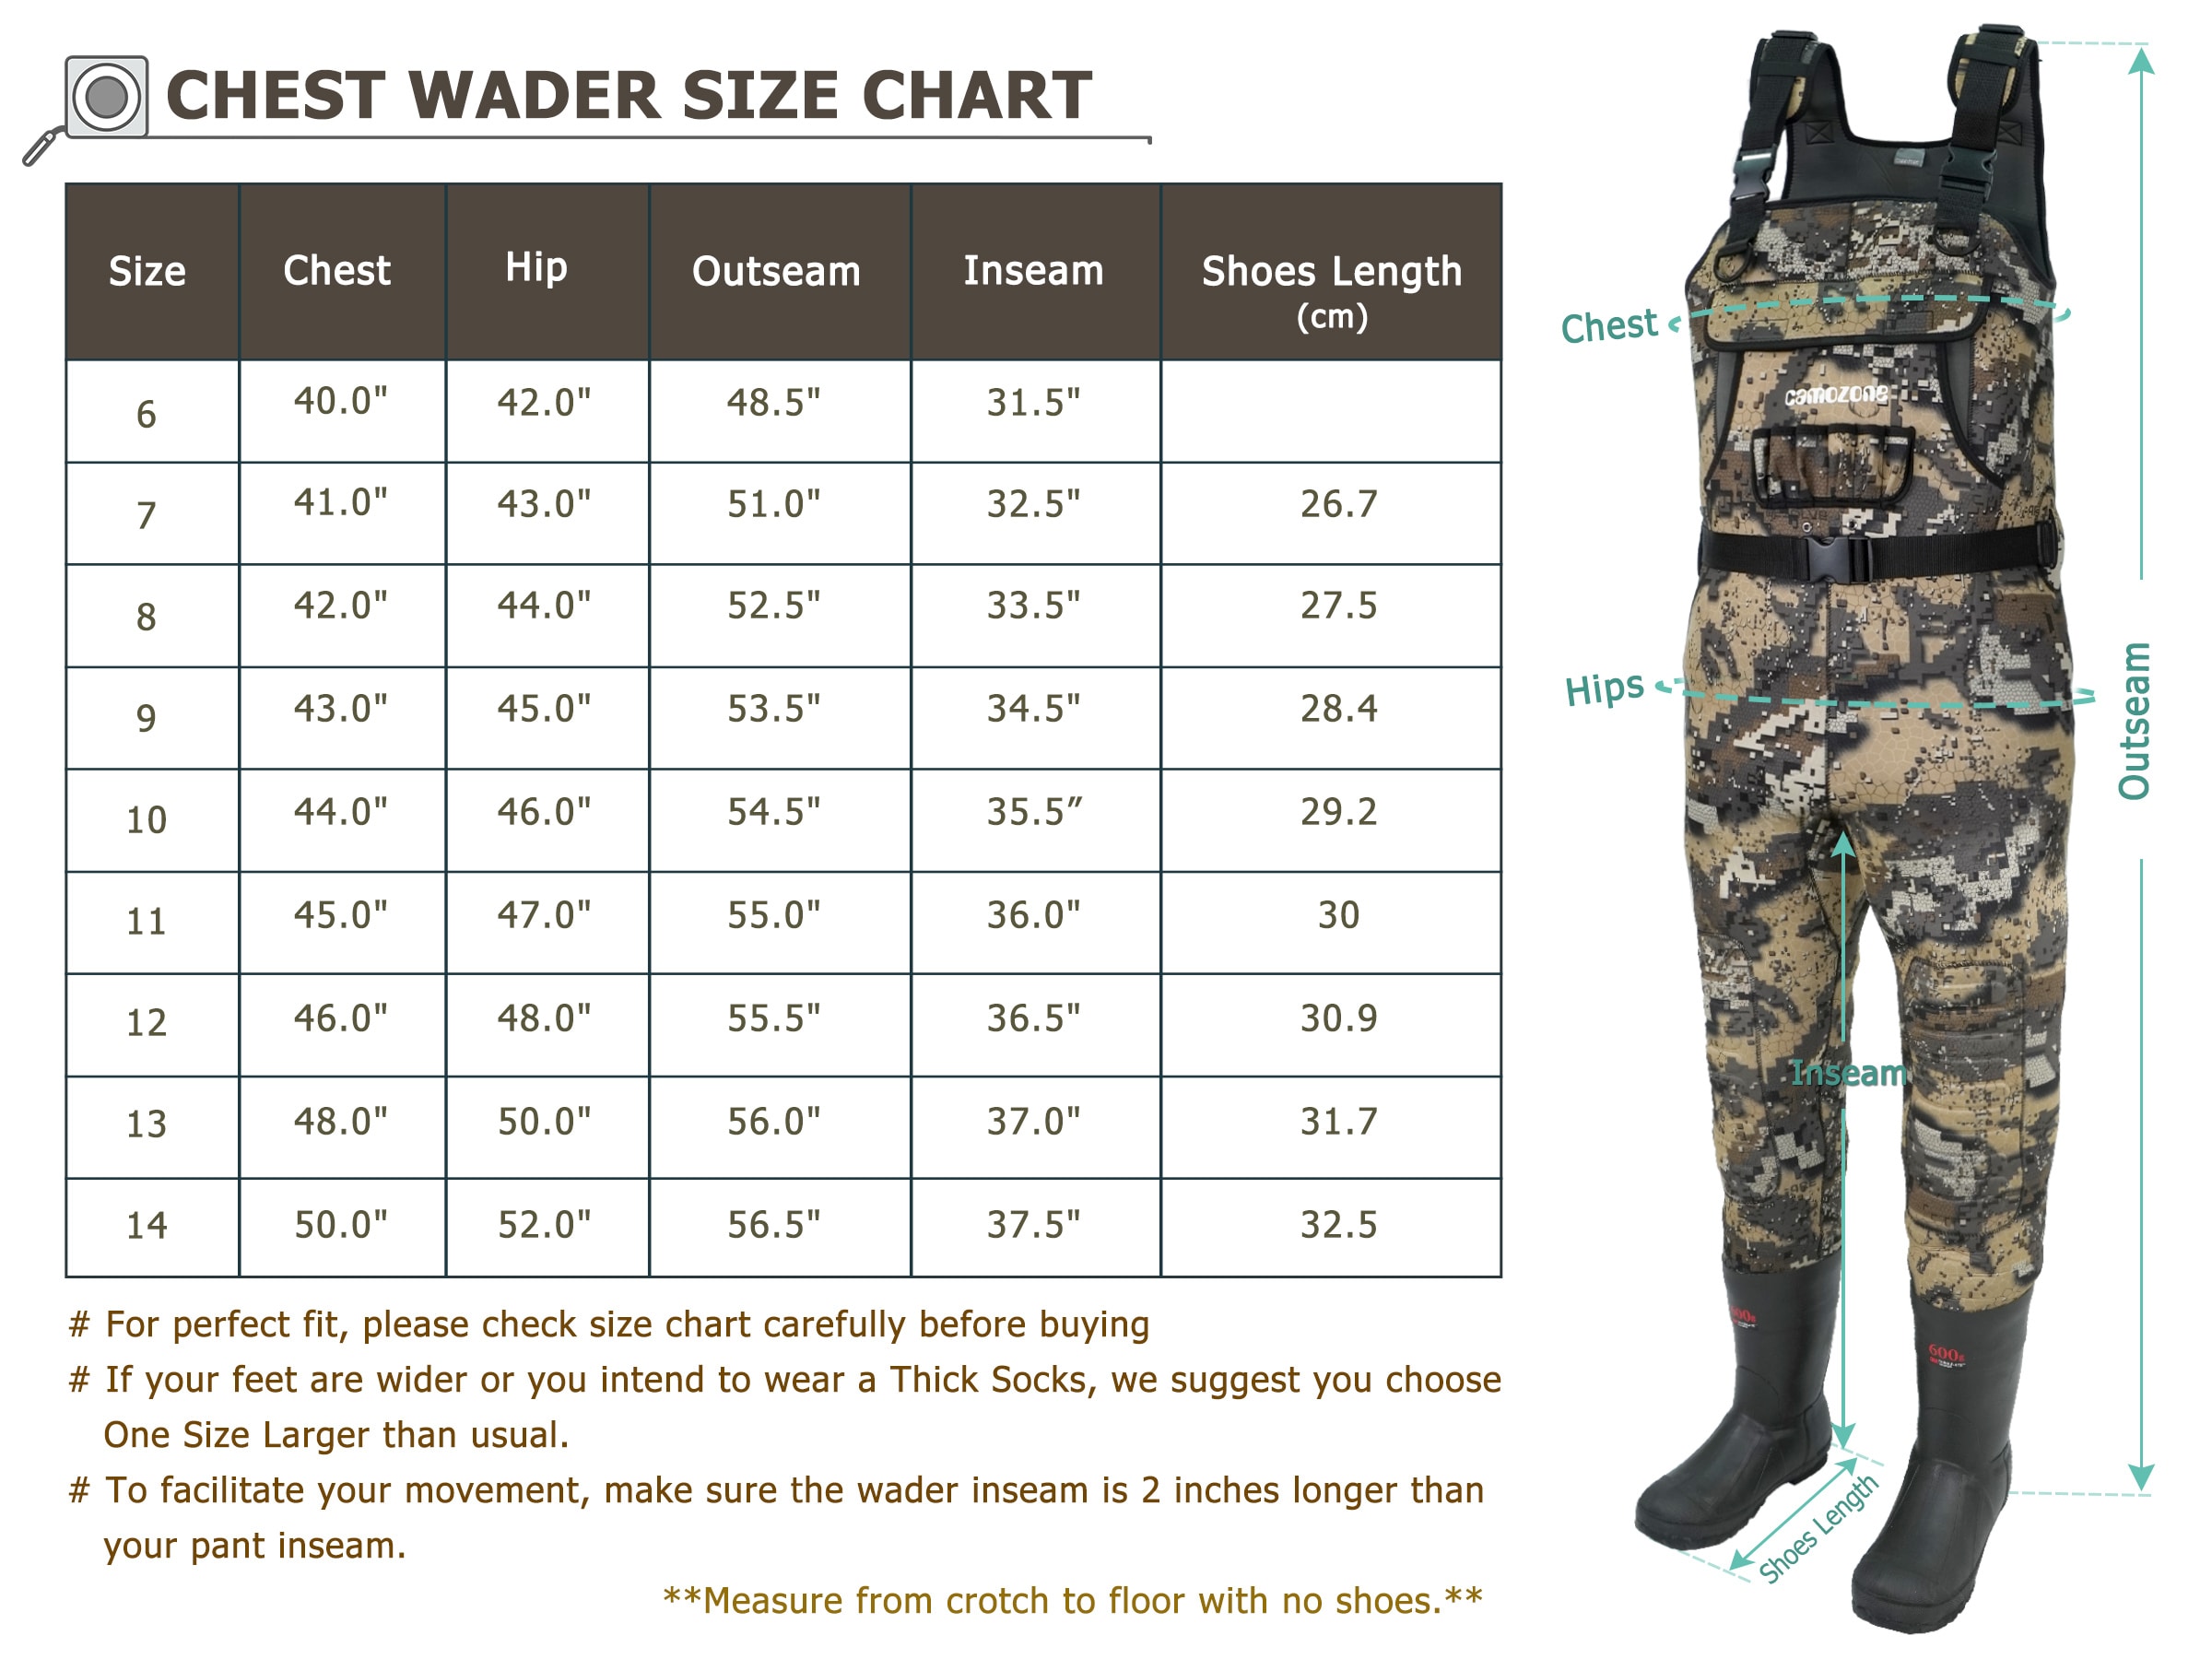 CAMOZONE Neoprene Chest Waders with Boots-size13 Unisex Fishing